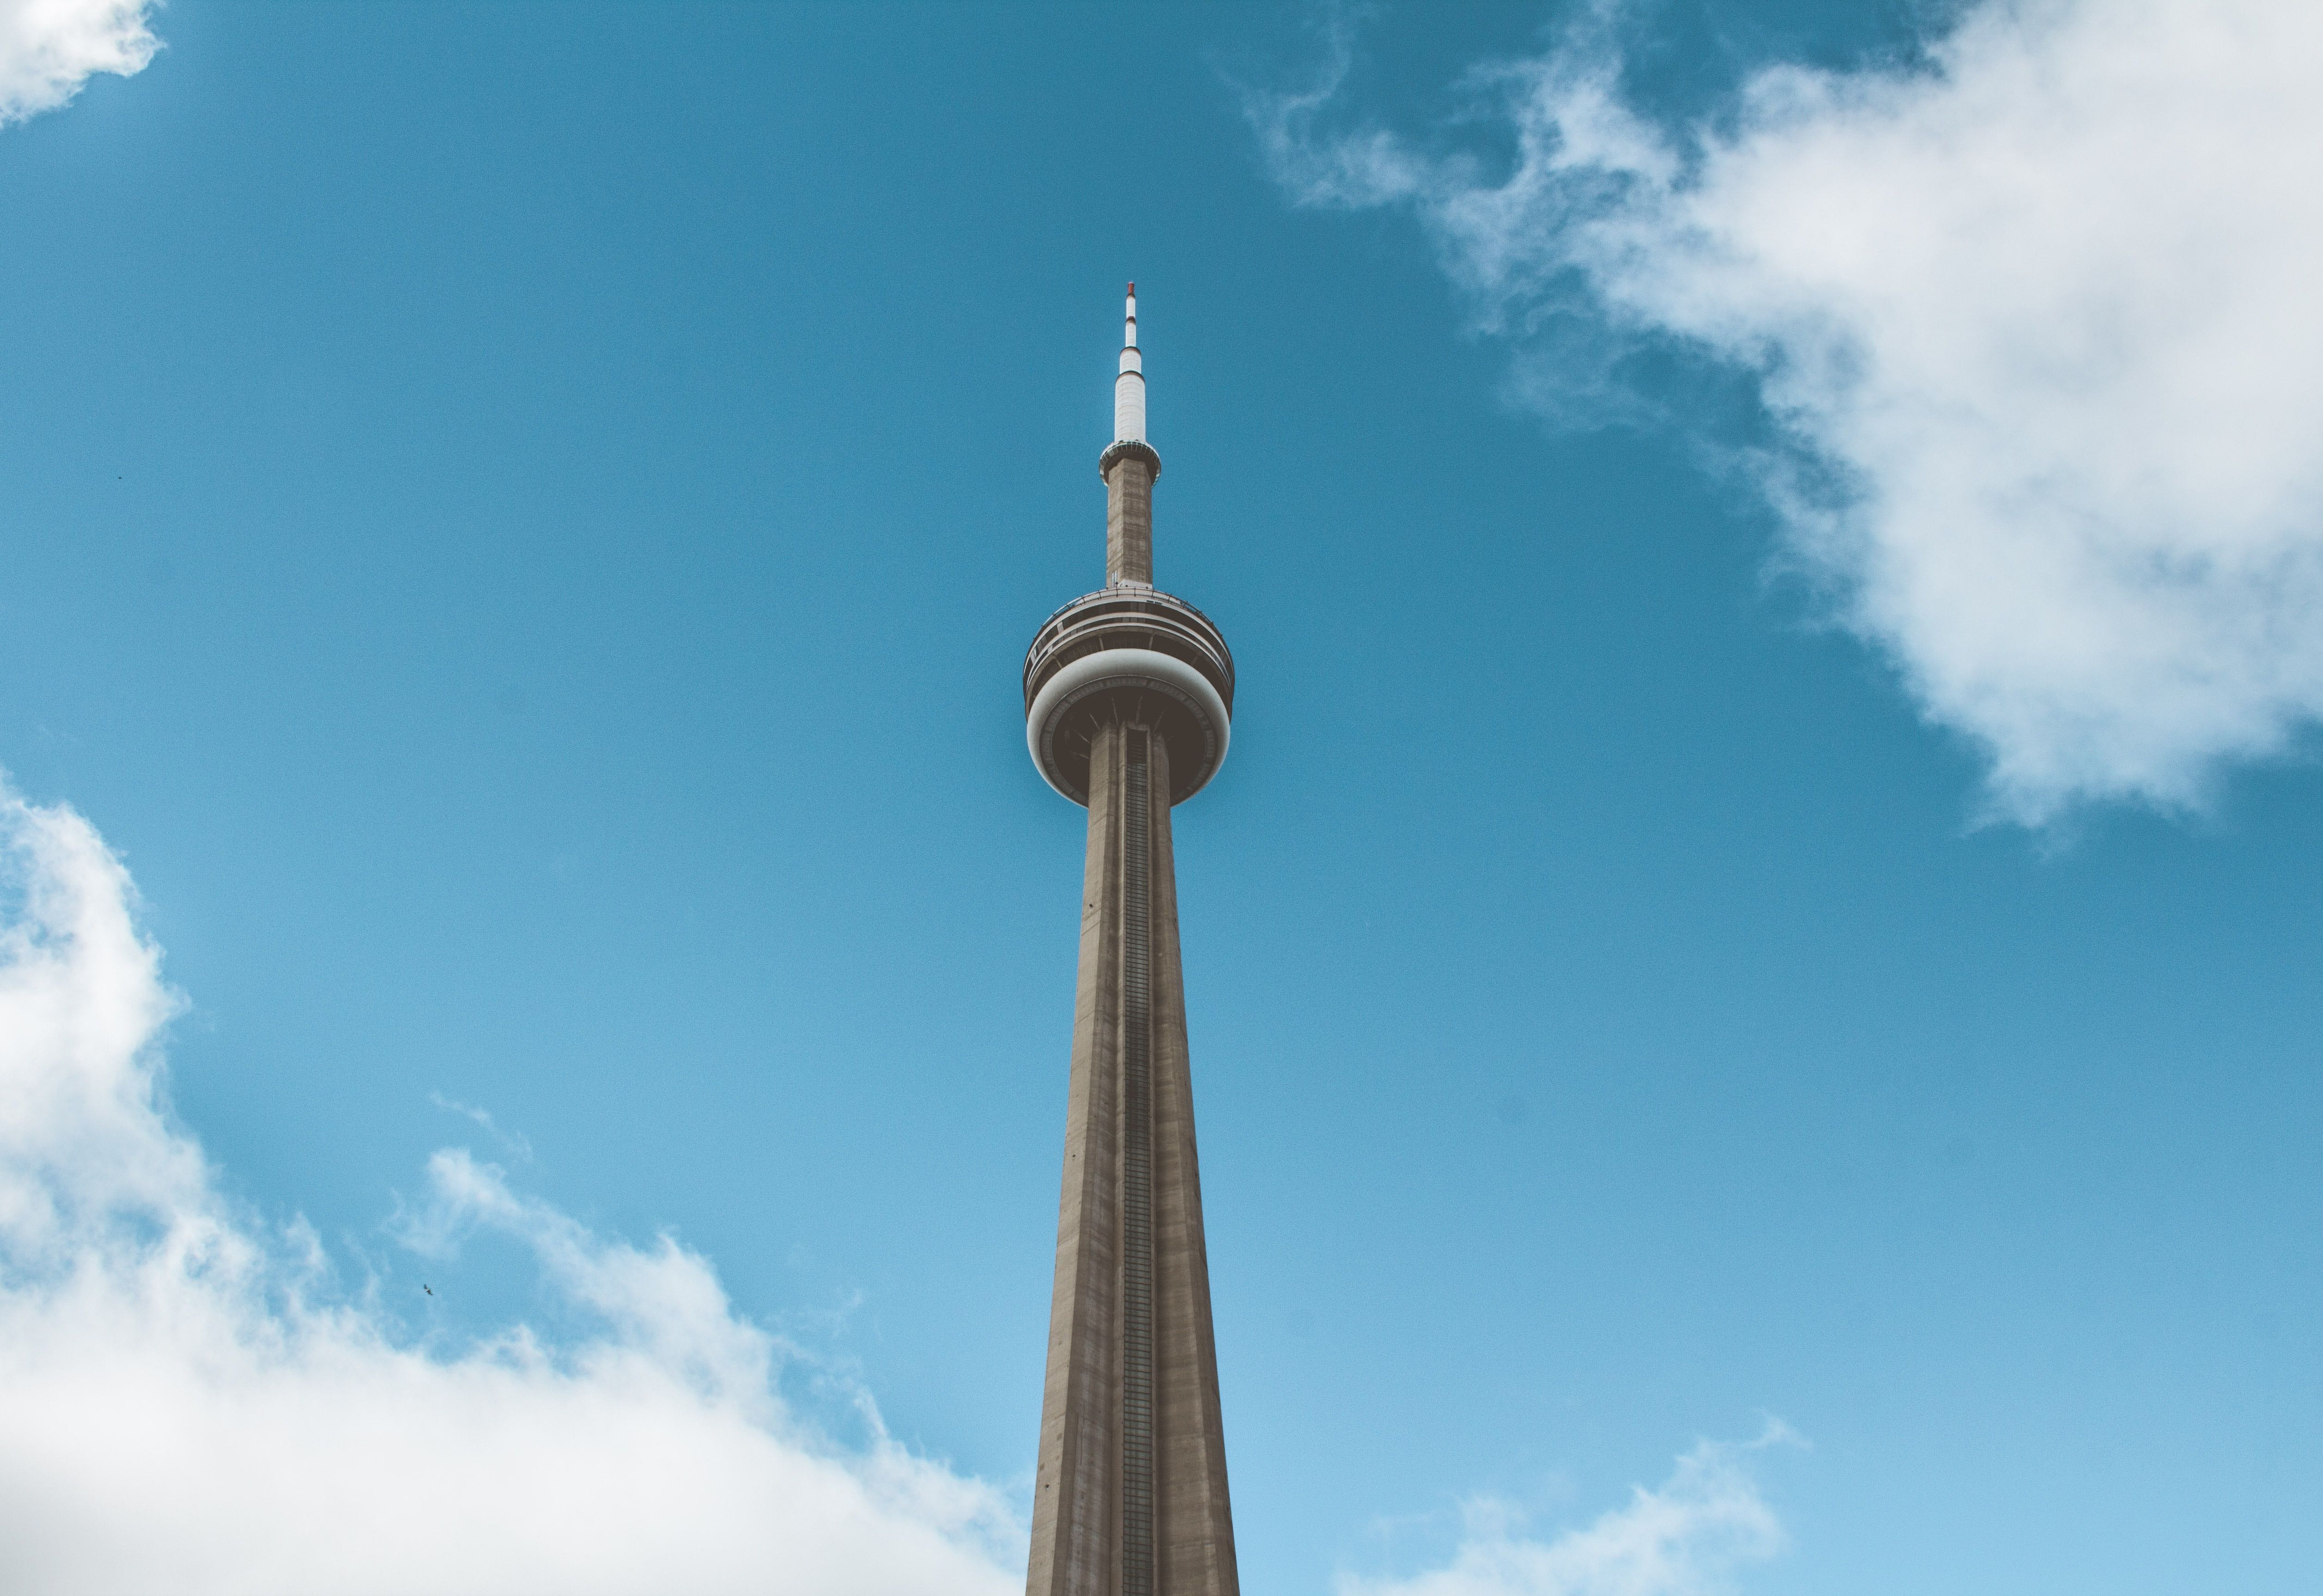 Image of CN Tower in Toronto